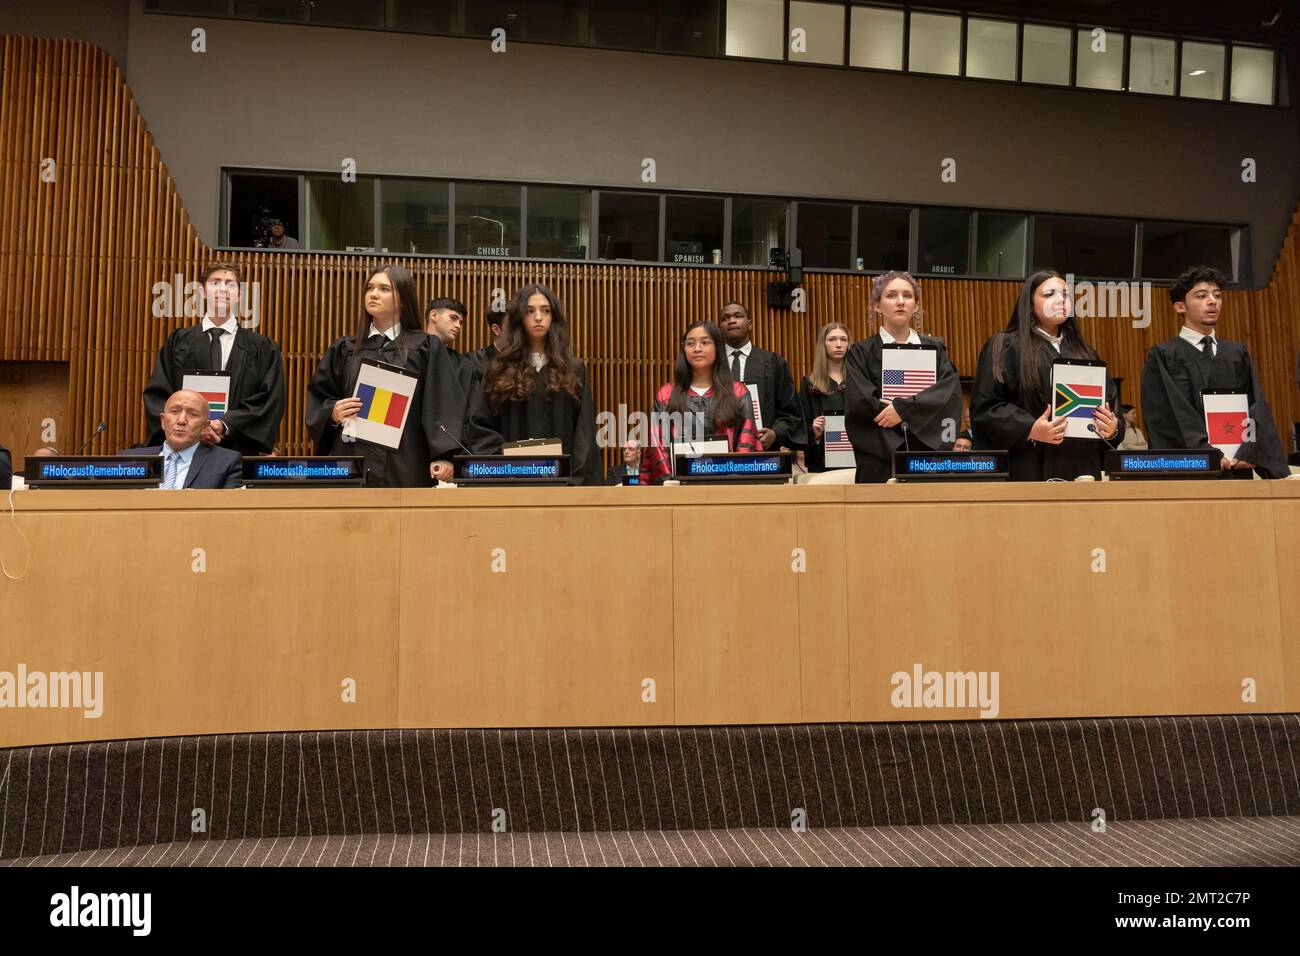 NEW YORK, NEW YORK - JANUARY 31: Students from multiple counties participate at a special event 'International Mock Trial on Human Rights' on the occasion of the International Day of Commemoration in Memory of the Victims of the Holocaust (27 Jan) at the New York United Nations Headquarters on January 31, 2023 in New York City.    The participants, student from several countries, interrogate the actions and responsibilities of Ernst Rüdin, the so-called father of Nazi Racial Hygiene. Stock Photo